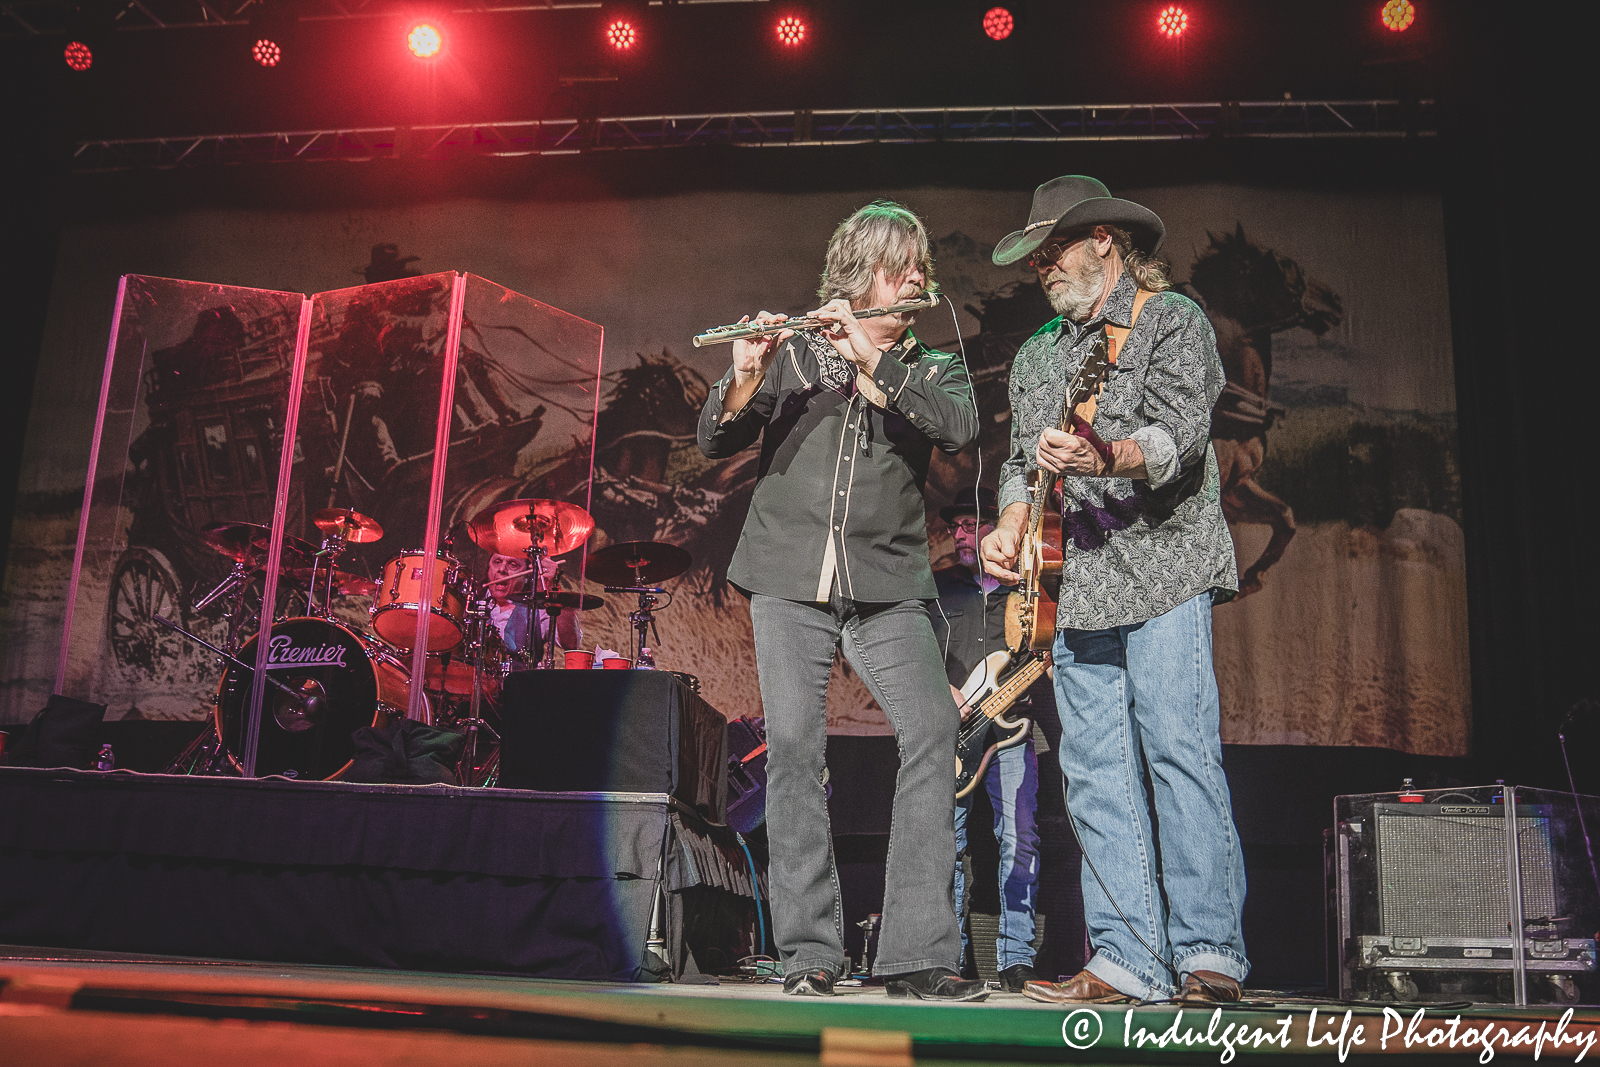 Marcus James Henderson, Rick Willis, Tony Black and B.B. Borden of The Marshall Tucker Band performing live in concert at Ameristar Casino in Kansas City, MO on October 28, 2022.